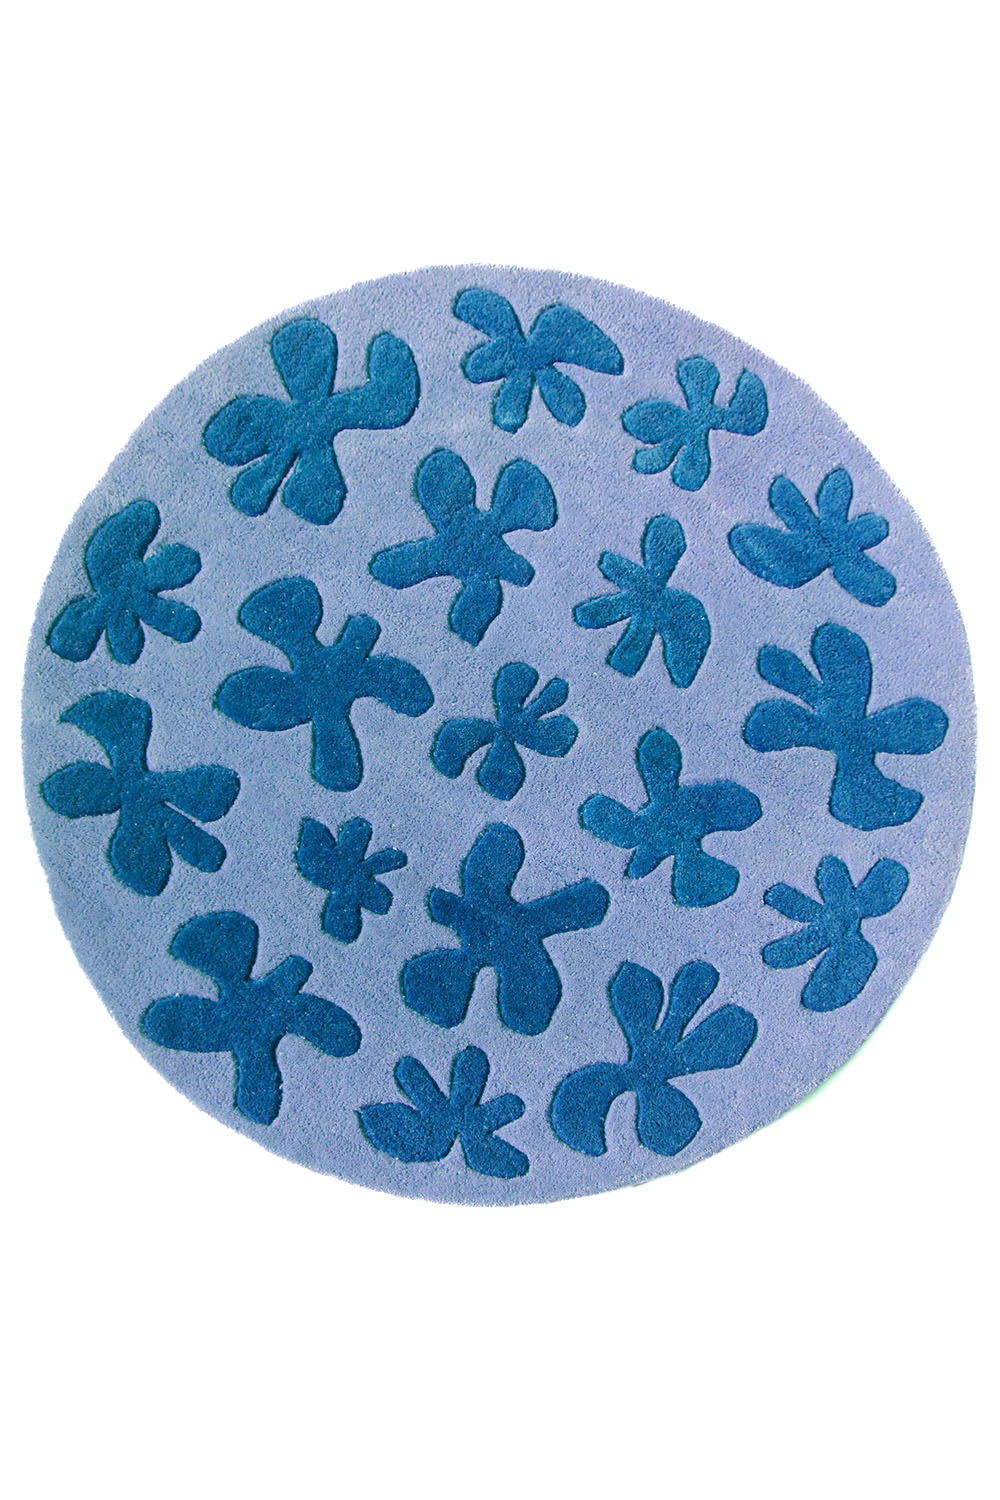 Floral Blossom Round Hand Tufted Wool Rug in Blue by Jubi